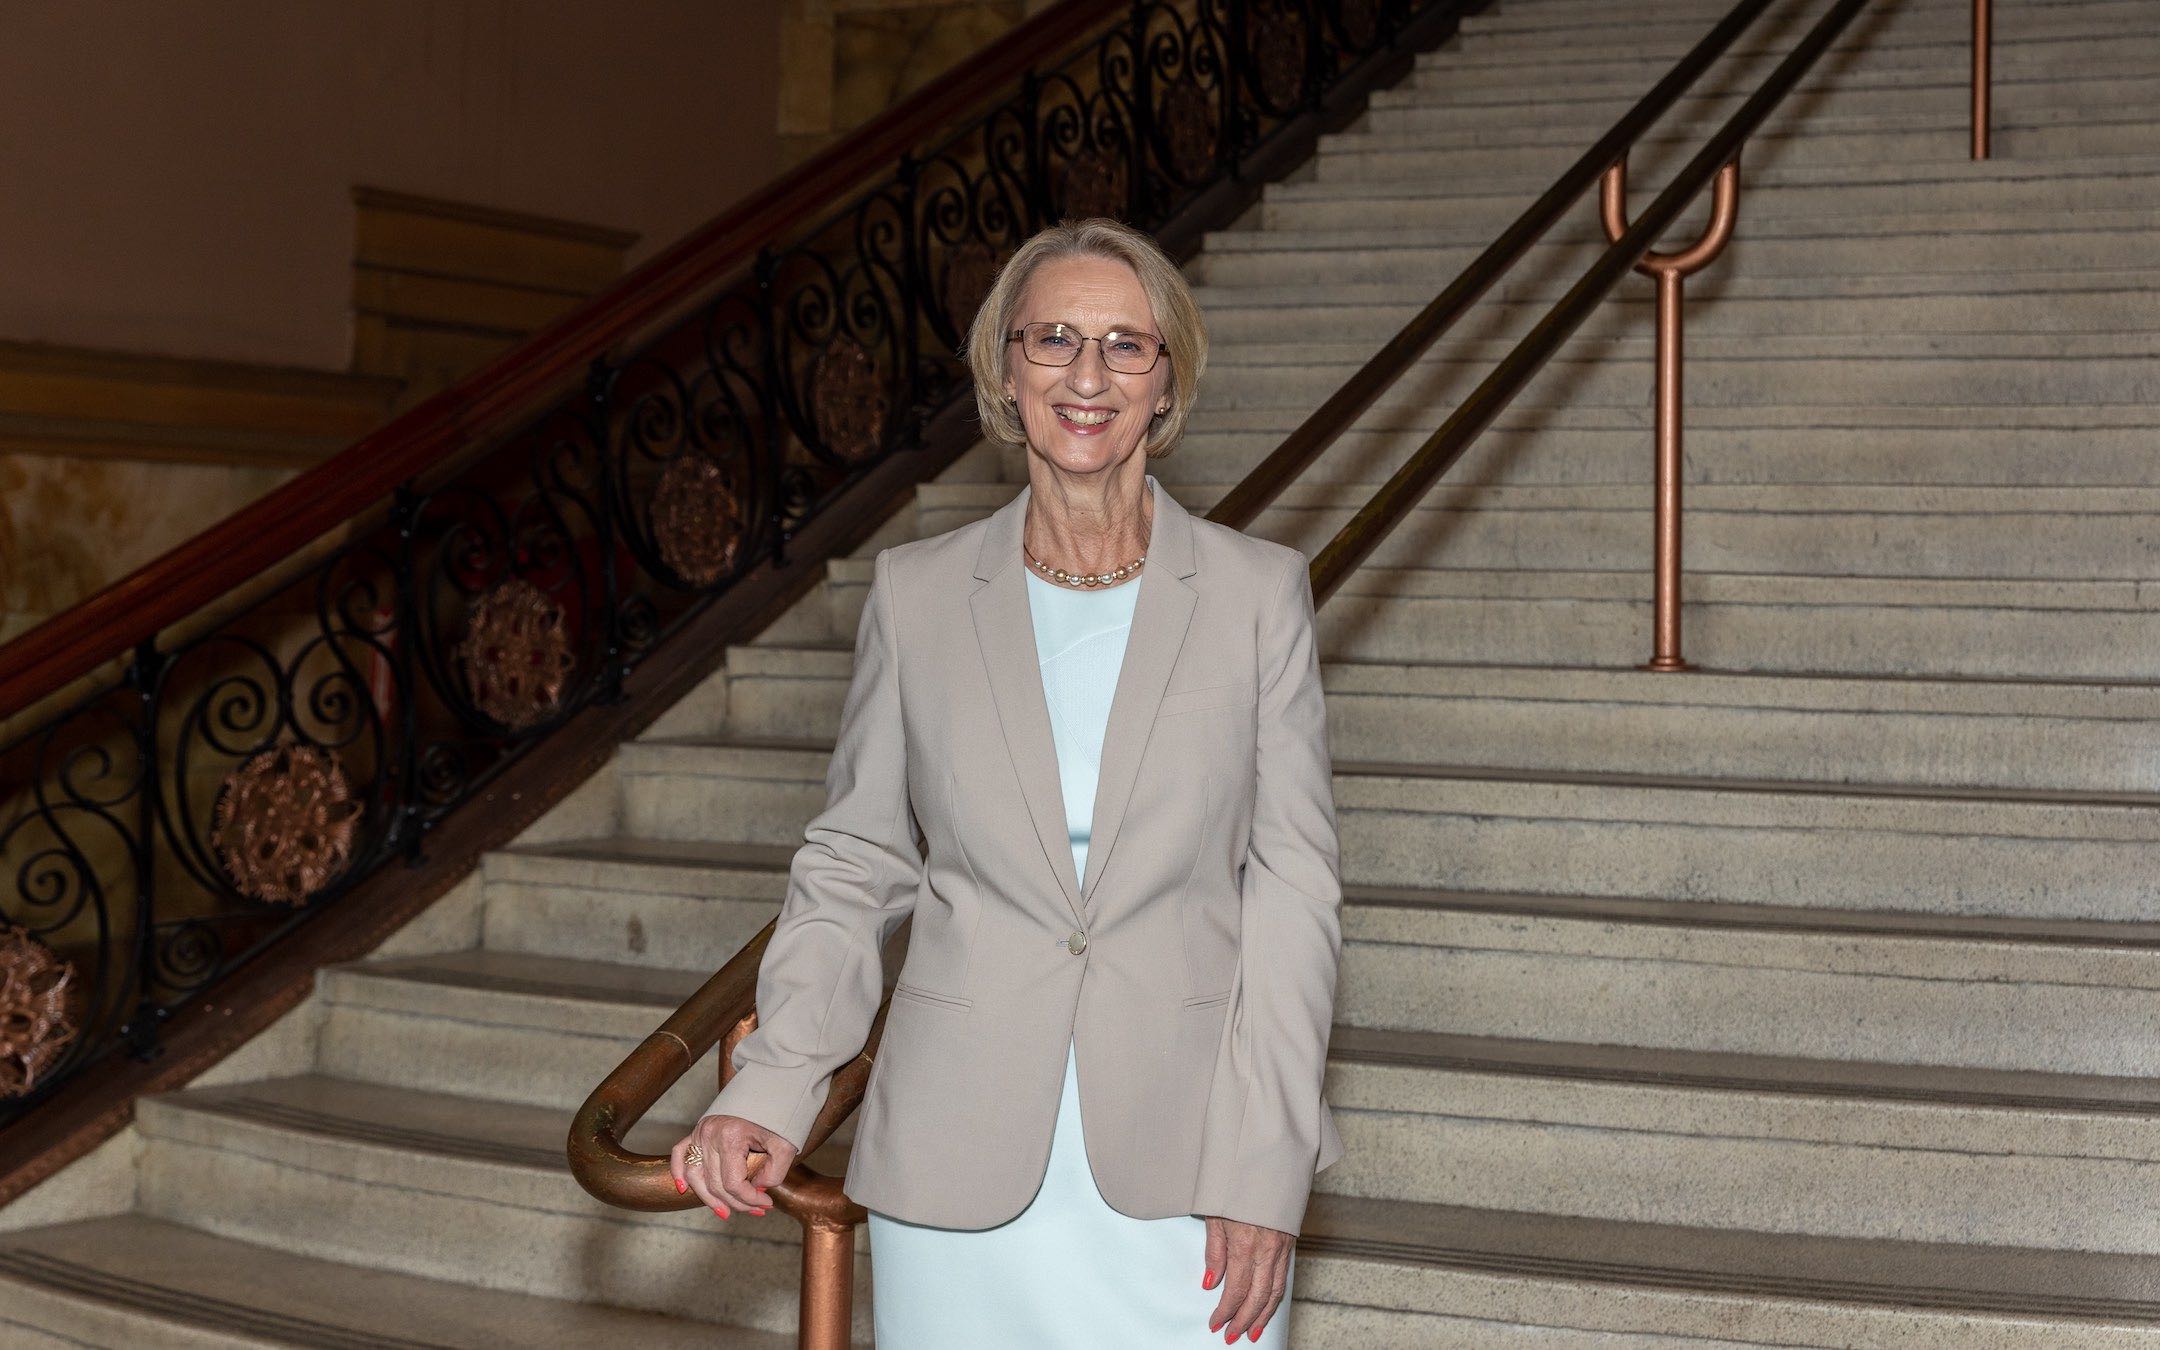 Mablene Krueger, chief operating officer of the Schaumburg Campus, standing in the grand stairs of the Auditorium Building